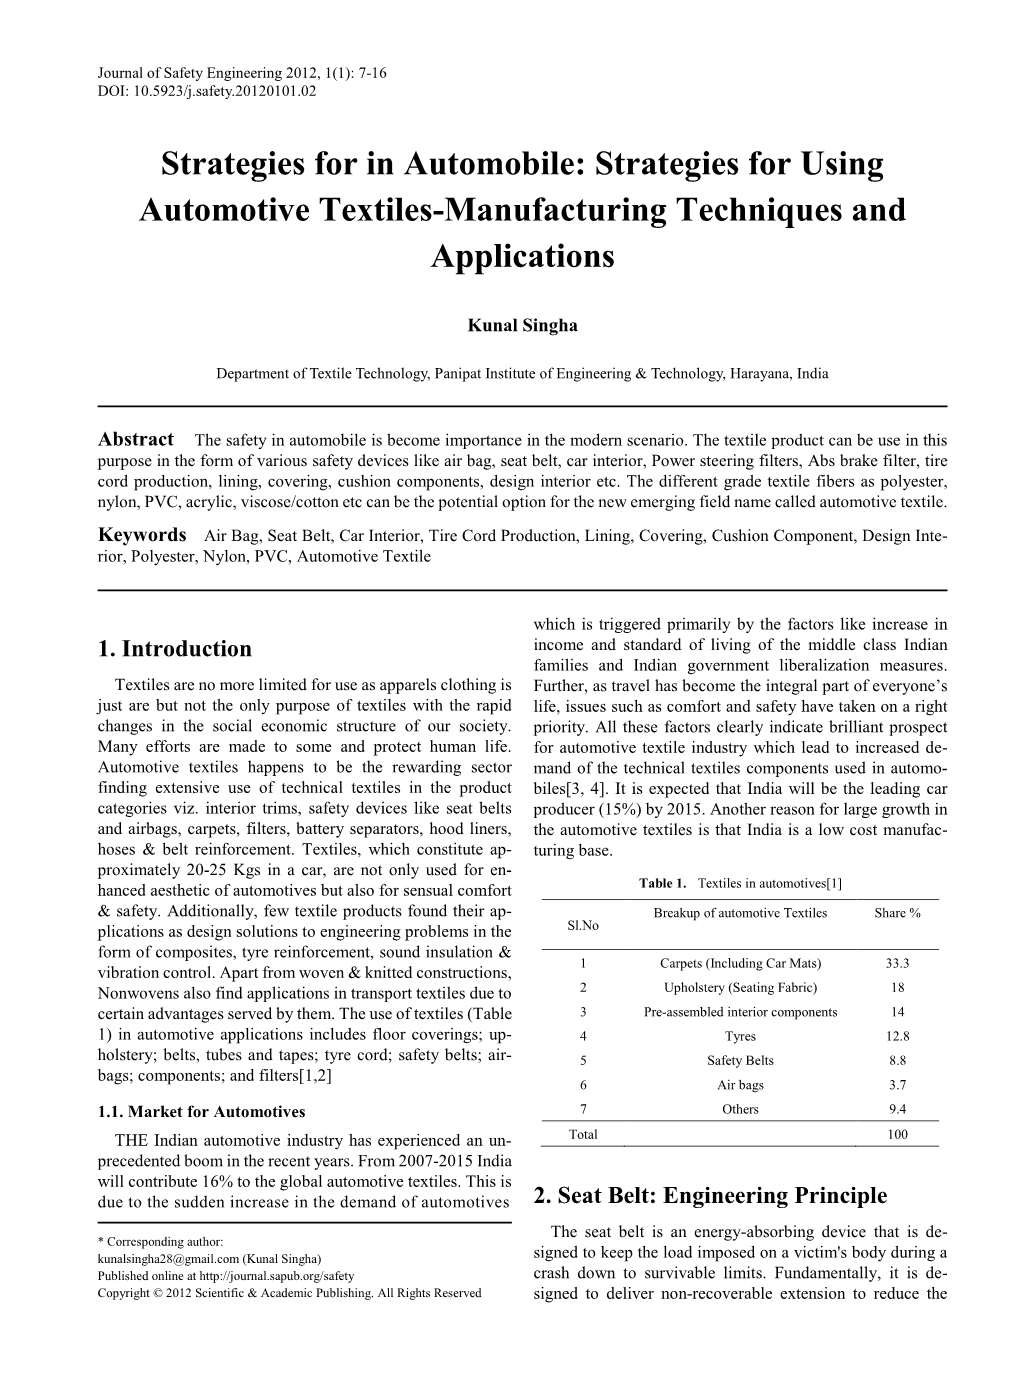 Strategies for Using Automotive Textiles-Manufacturing Techniques and Applications